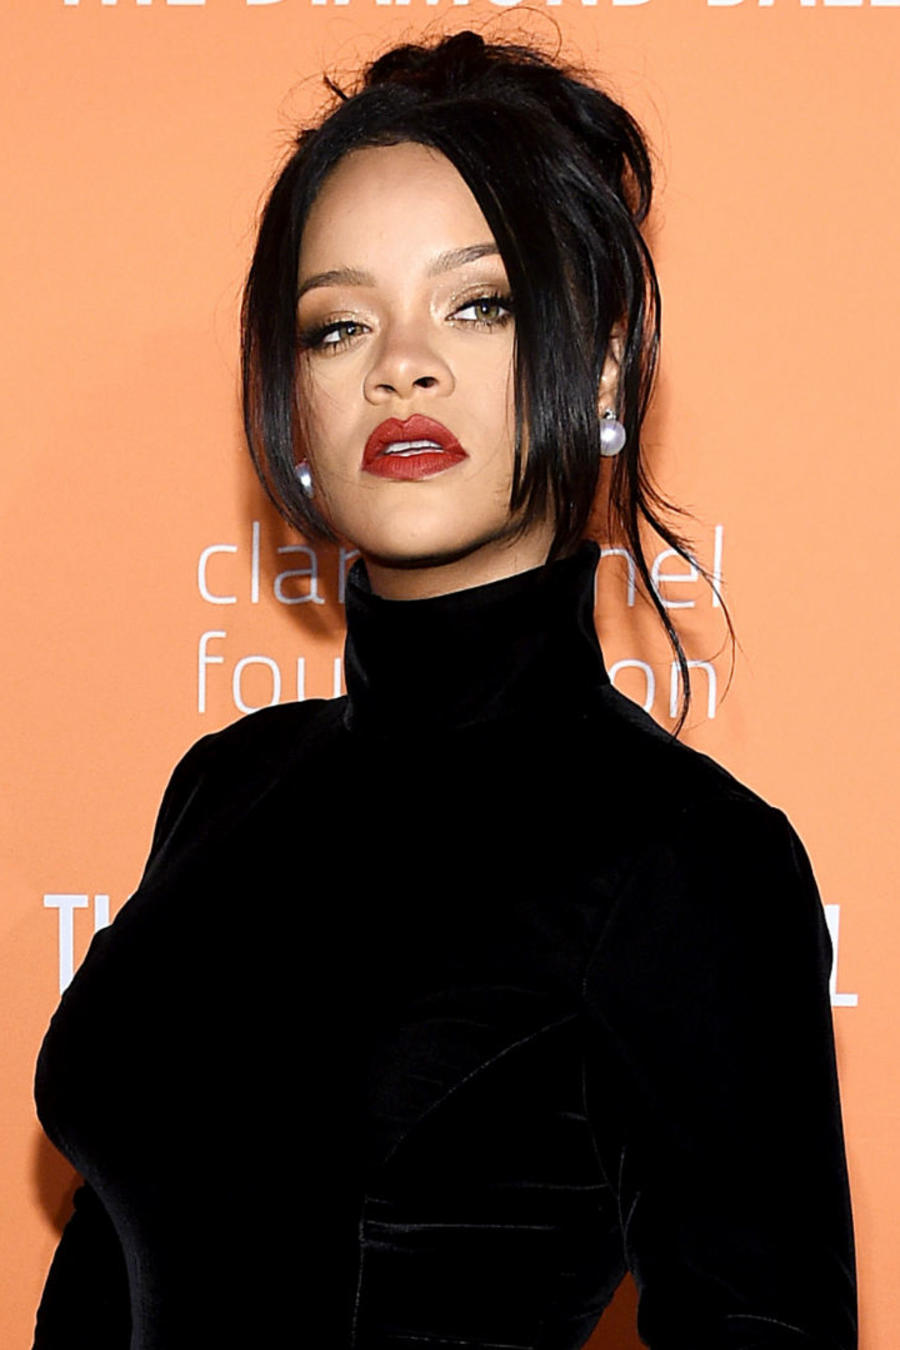 Rihanna Is Cordially Invited to Our Noche Buena Thanks to This Video (WATCH)